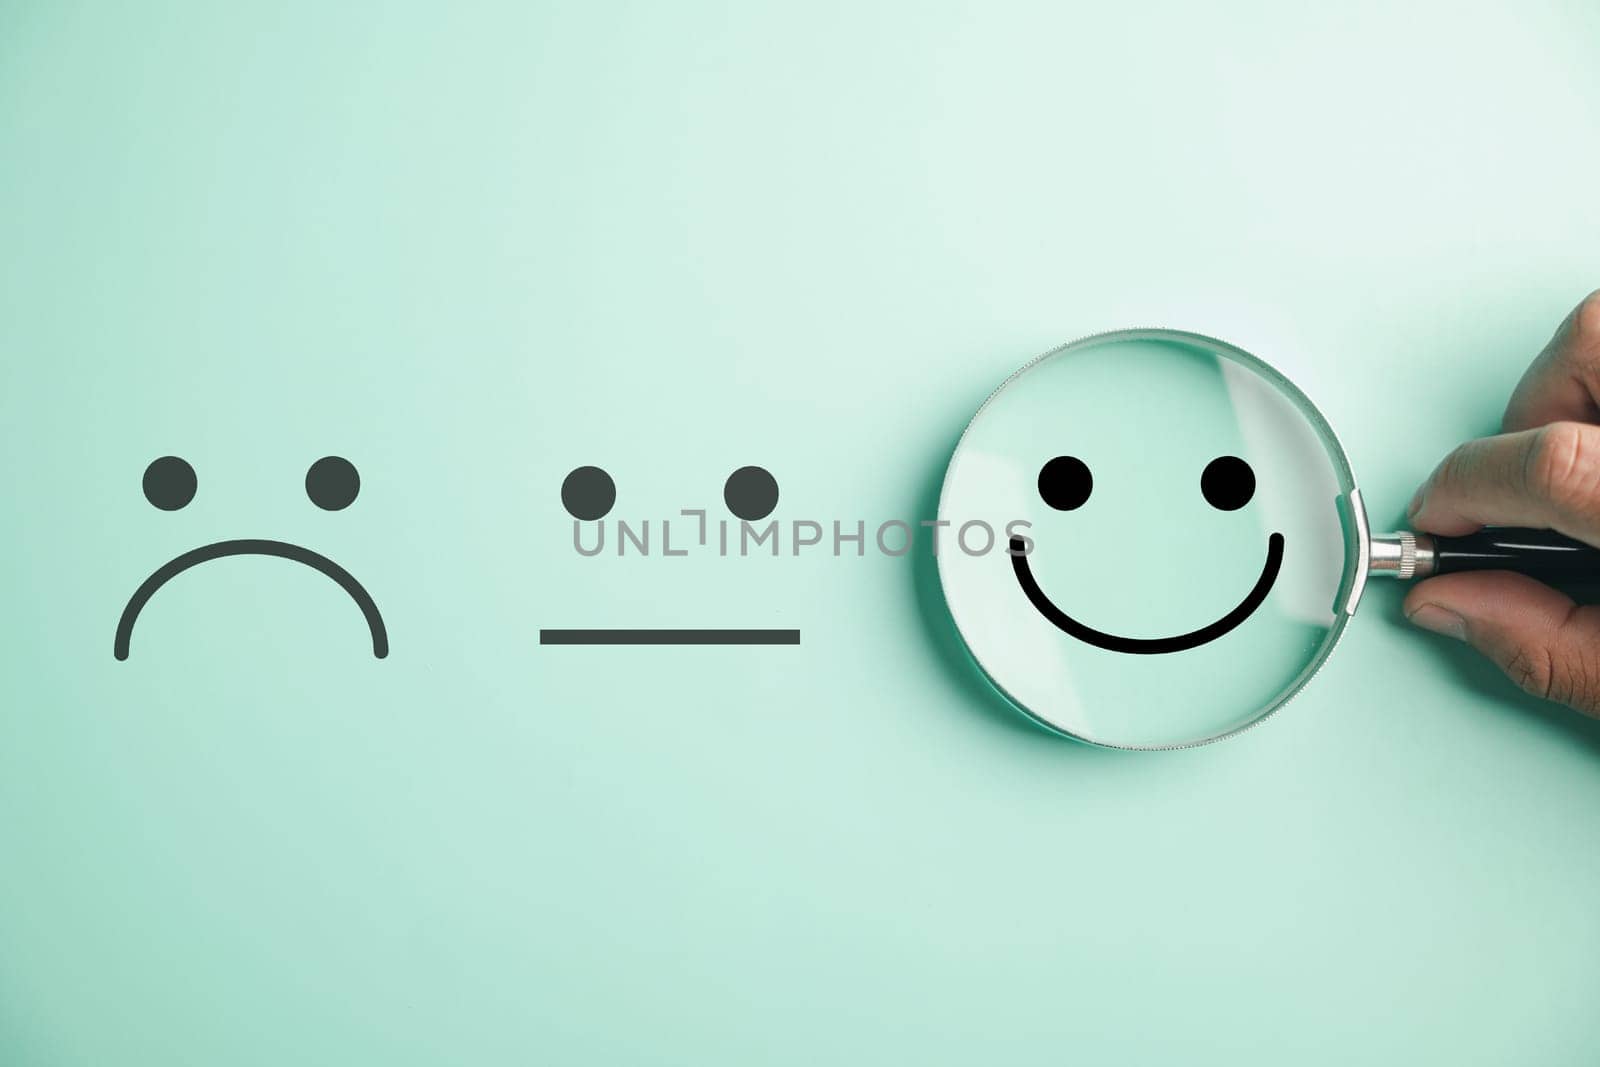 Magnifier in hand focuses on selected happy smiley face icon by Sorapop